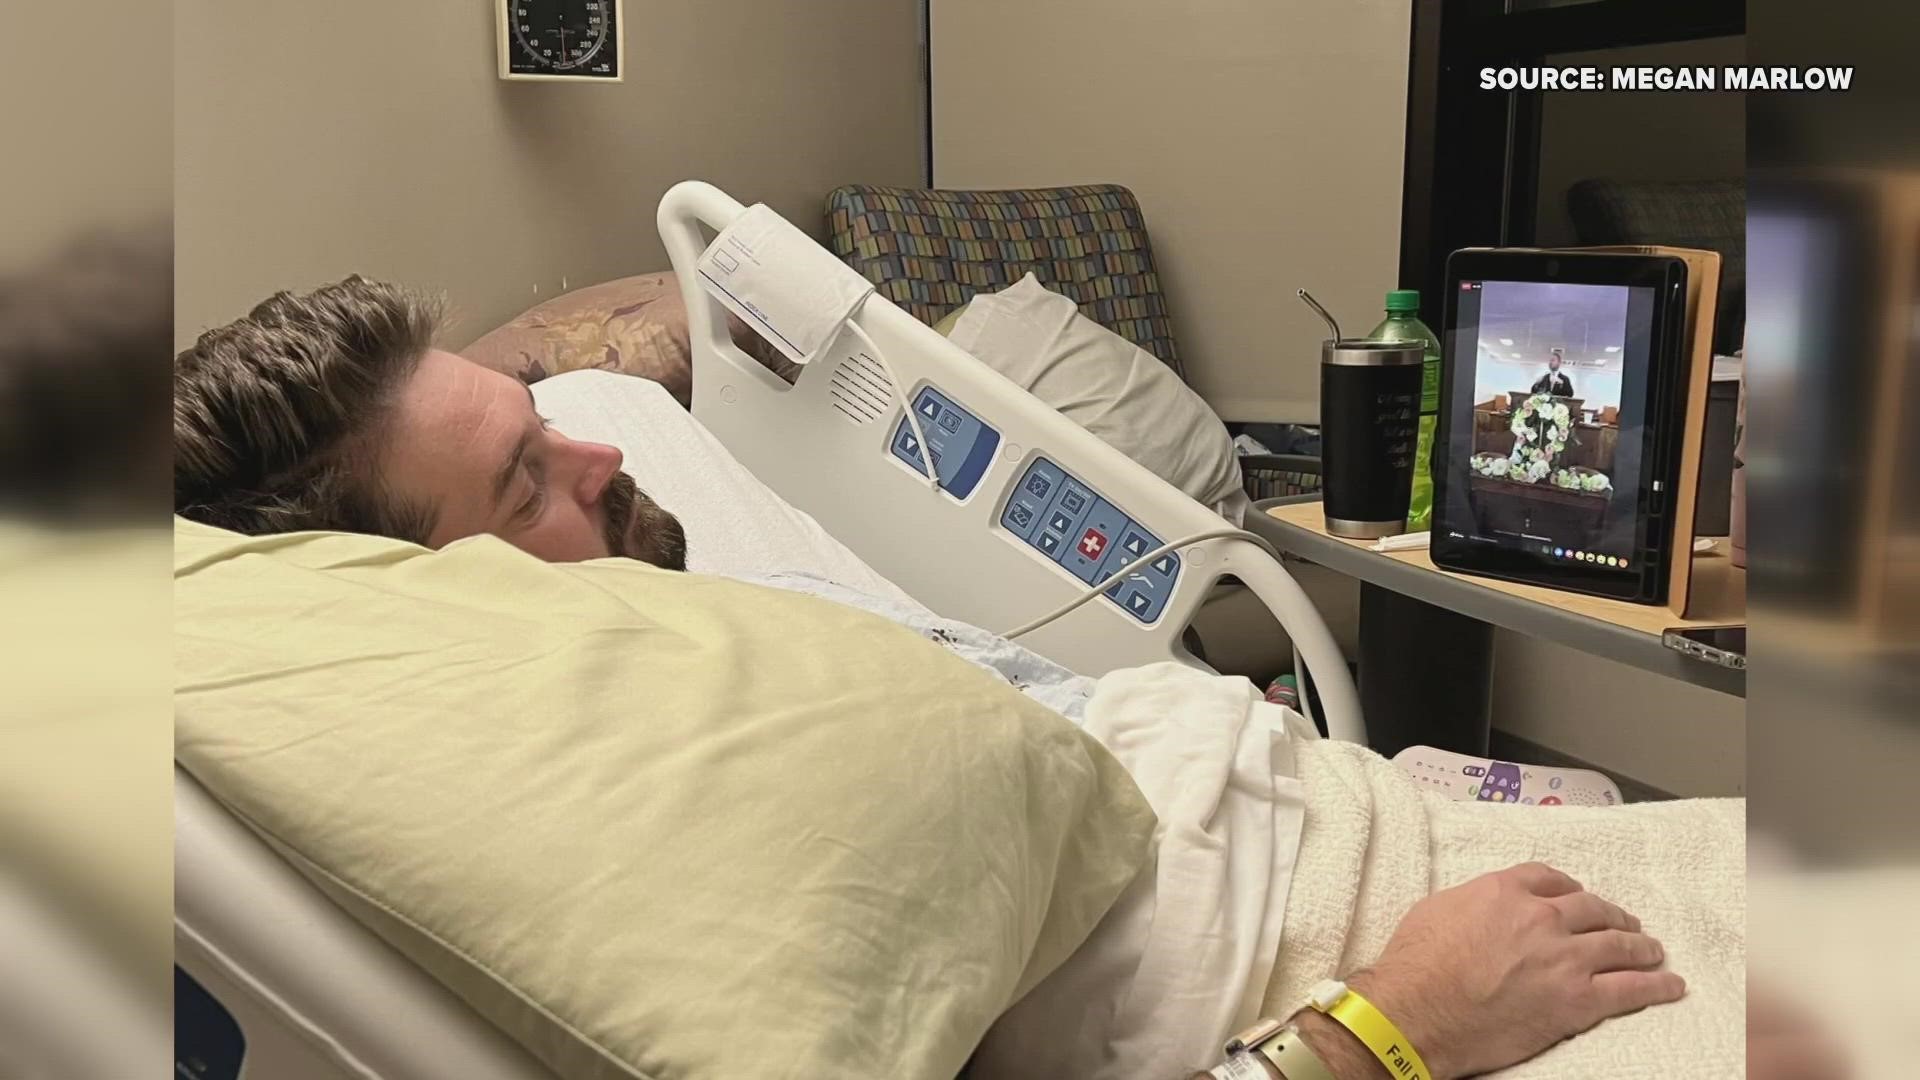 A Wilkes County man is back home after doctors pronounced him brain-dead. Ryan Marlow's wife Megan noticed something was off and ordered more testing.